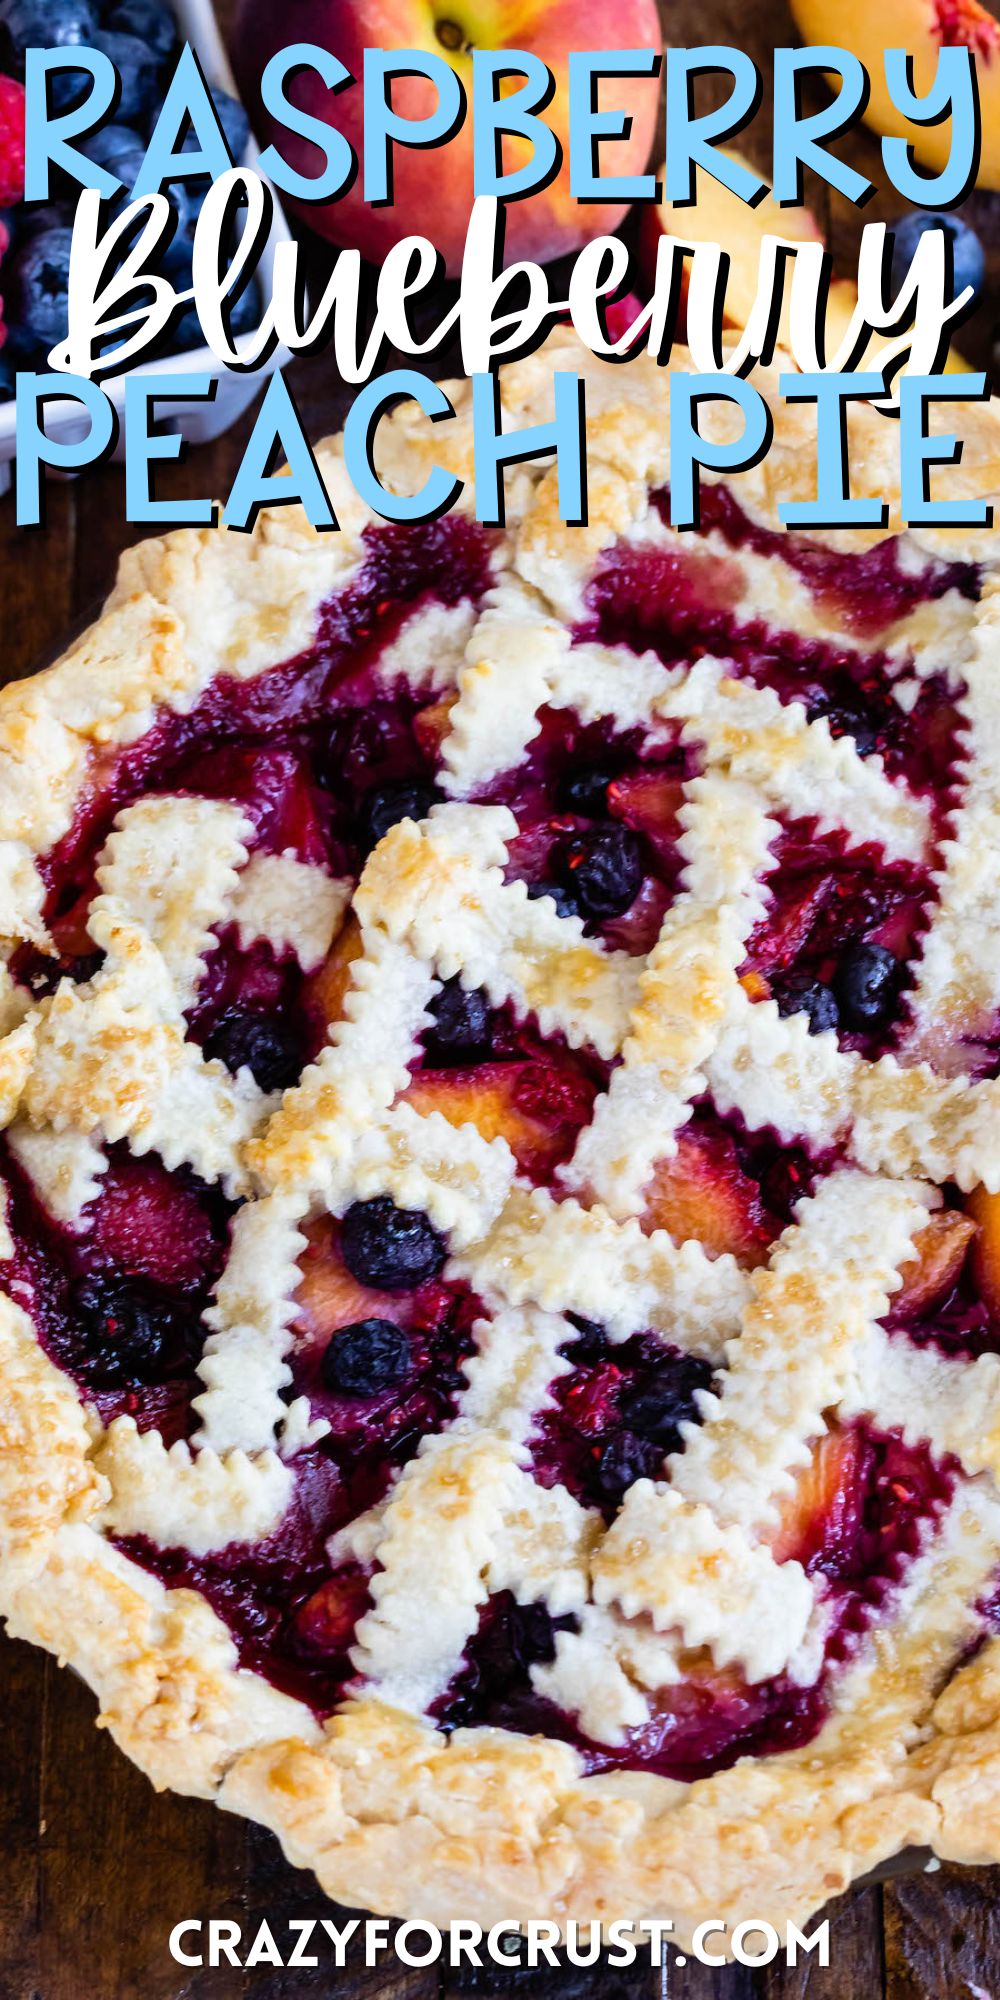 berry pie with decorative pie crust on top surrounded by slice fruit with words on the image.